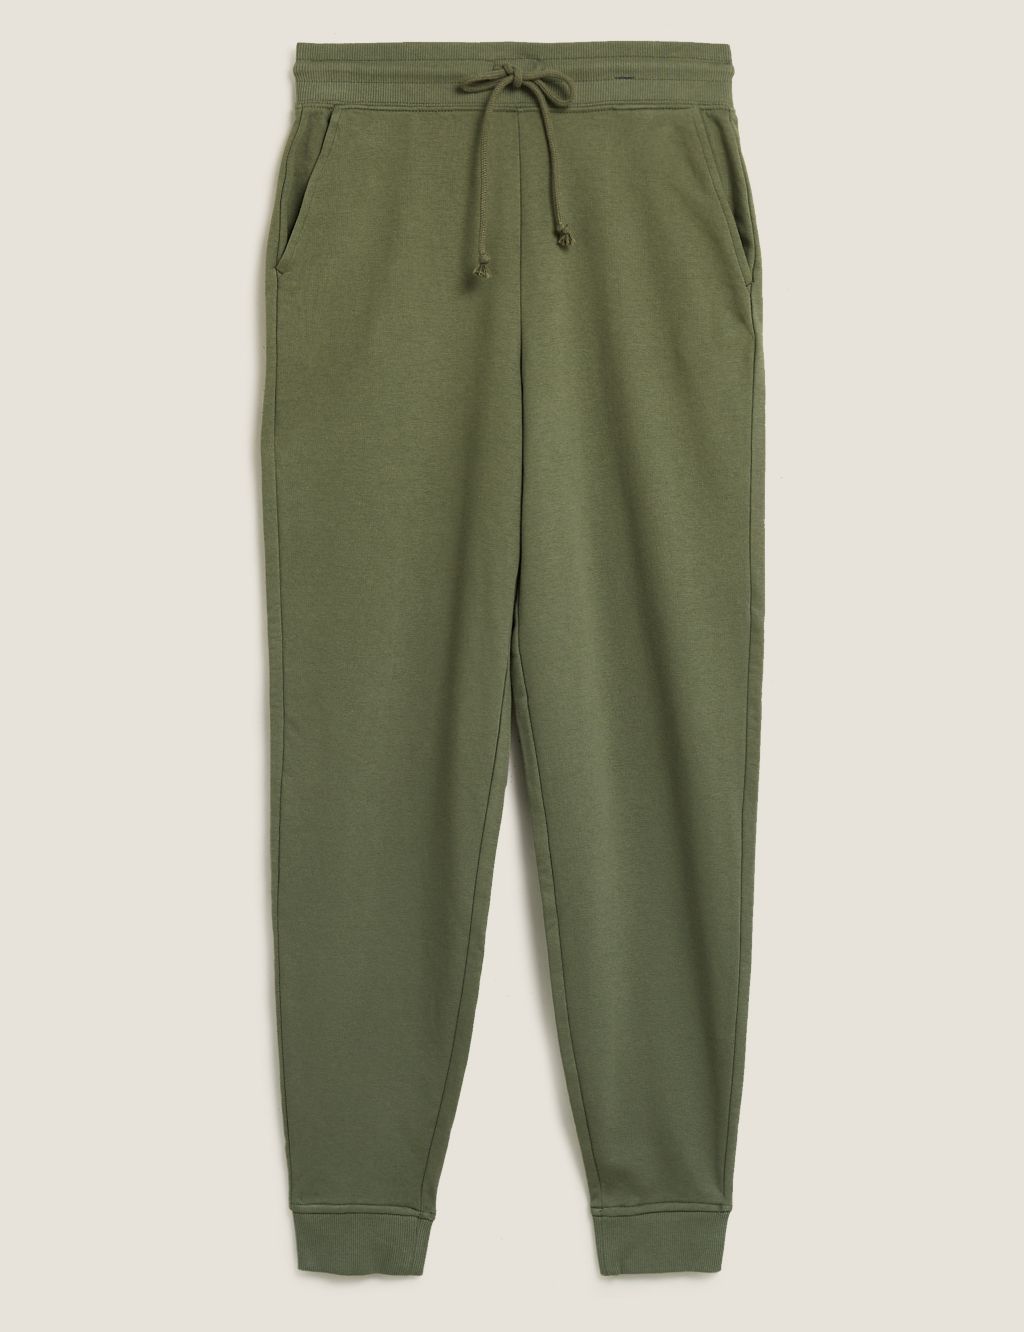 The Cotton Rich Cuffed Joggers image 2